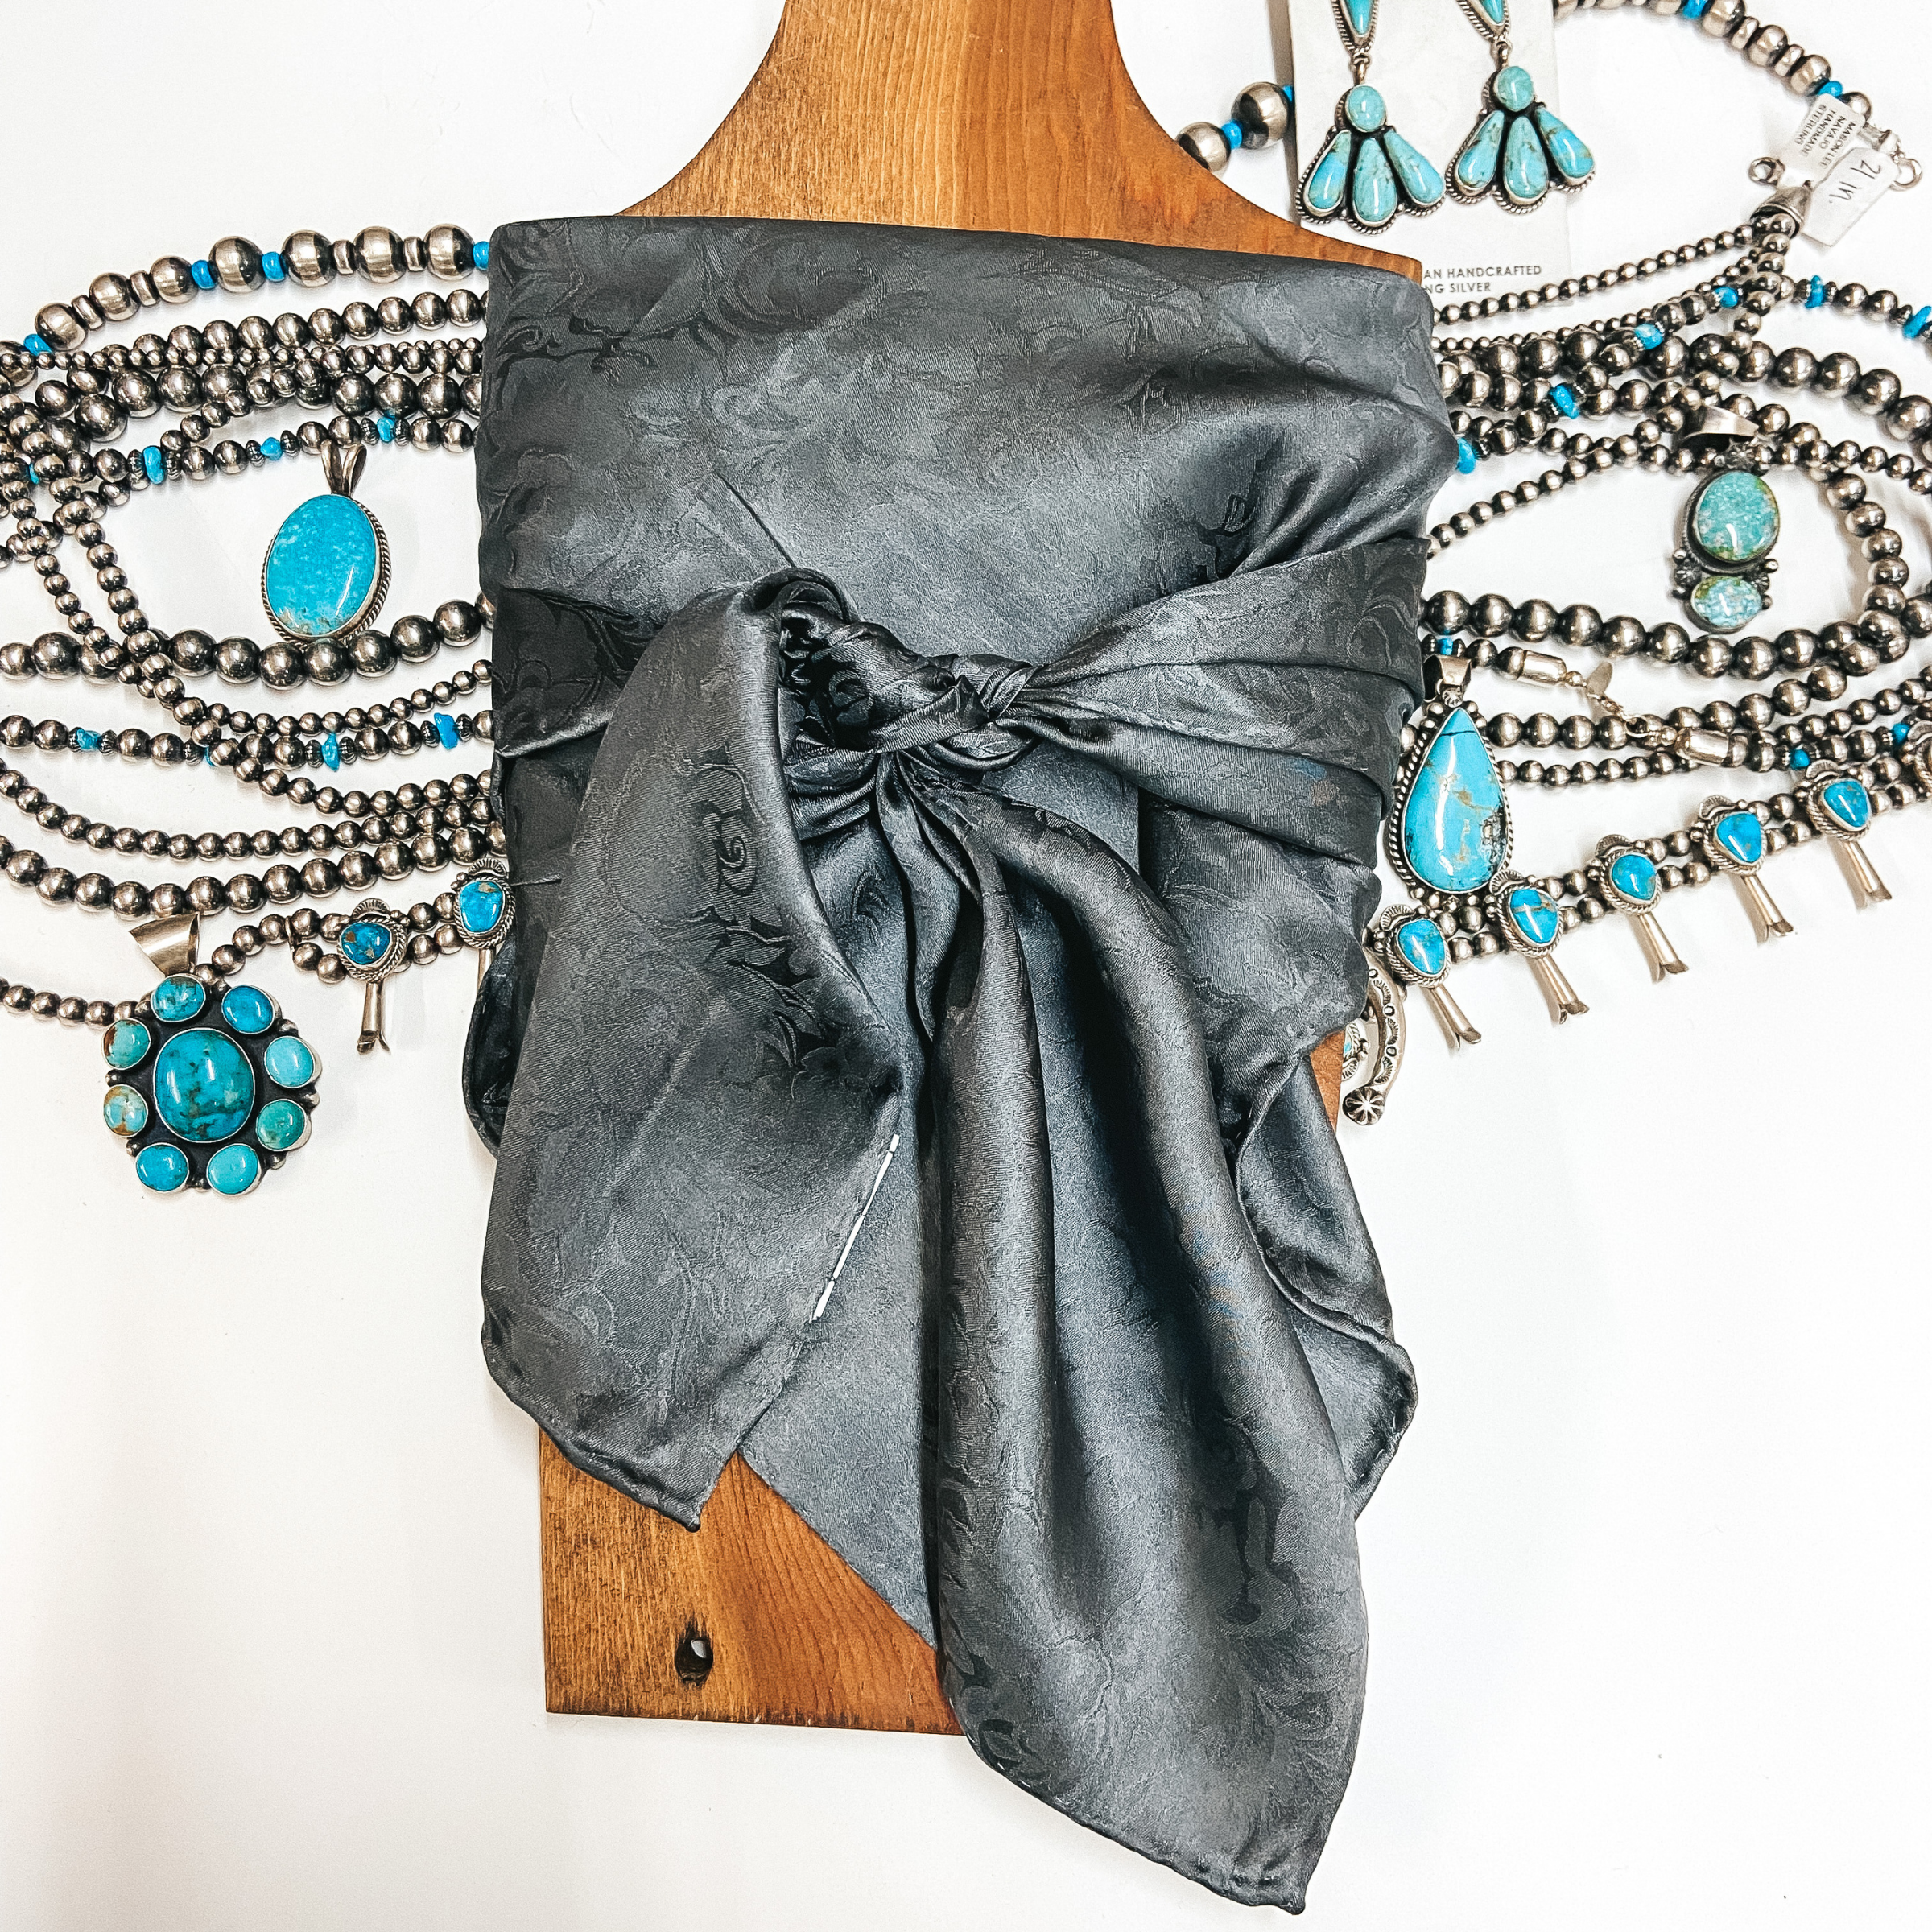 A jacquard print wild rag tied around a wooden display. Pictured on white background with sterling silver and turquoise jewelry.